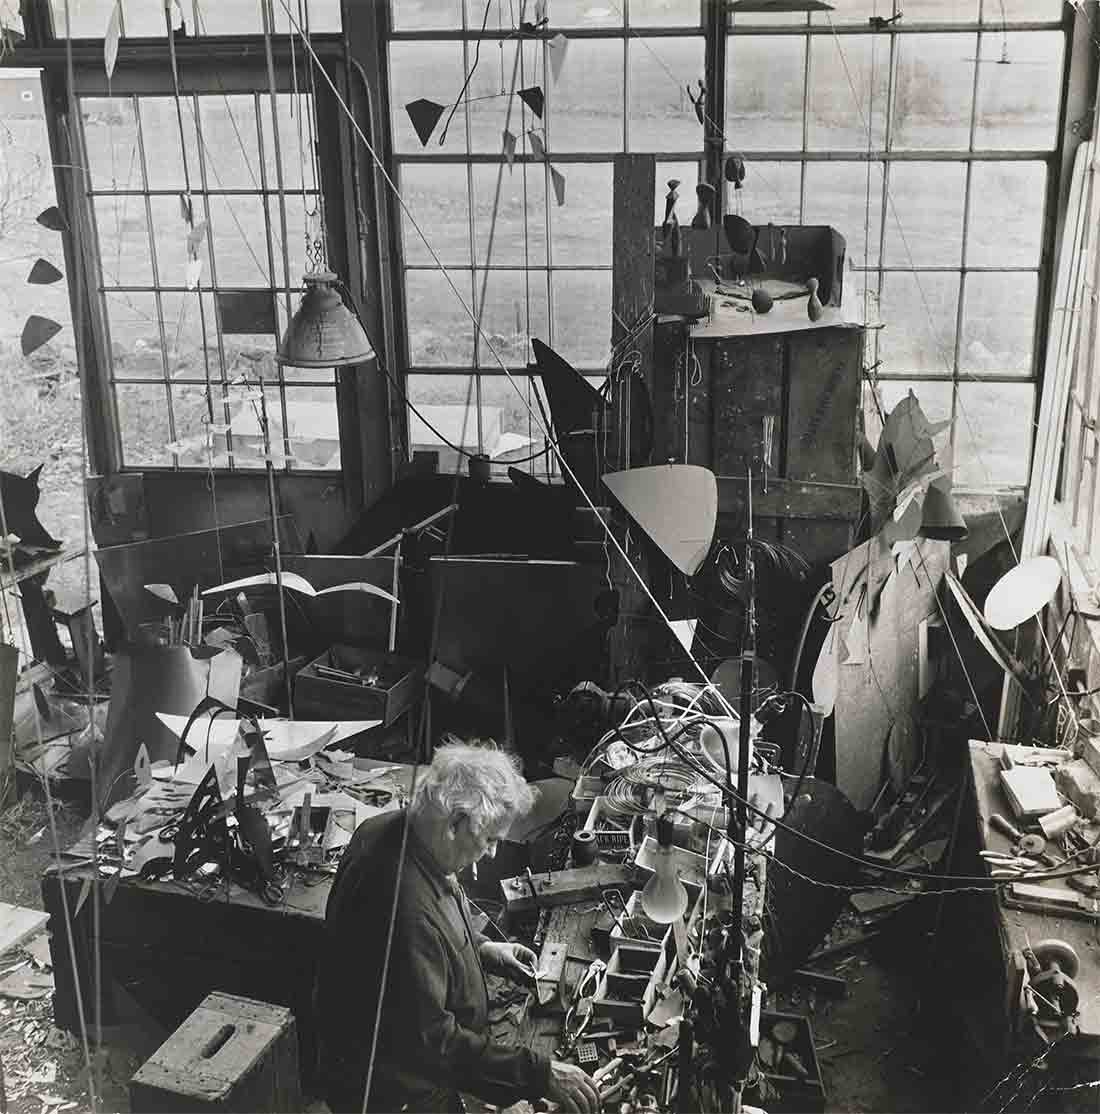 A person with unruly white hair stands in an extremely cluttered room with large windows, smoking a cigarette while working with some parts and pieces on a table completely filled with various objects.